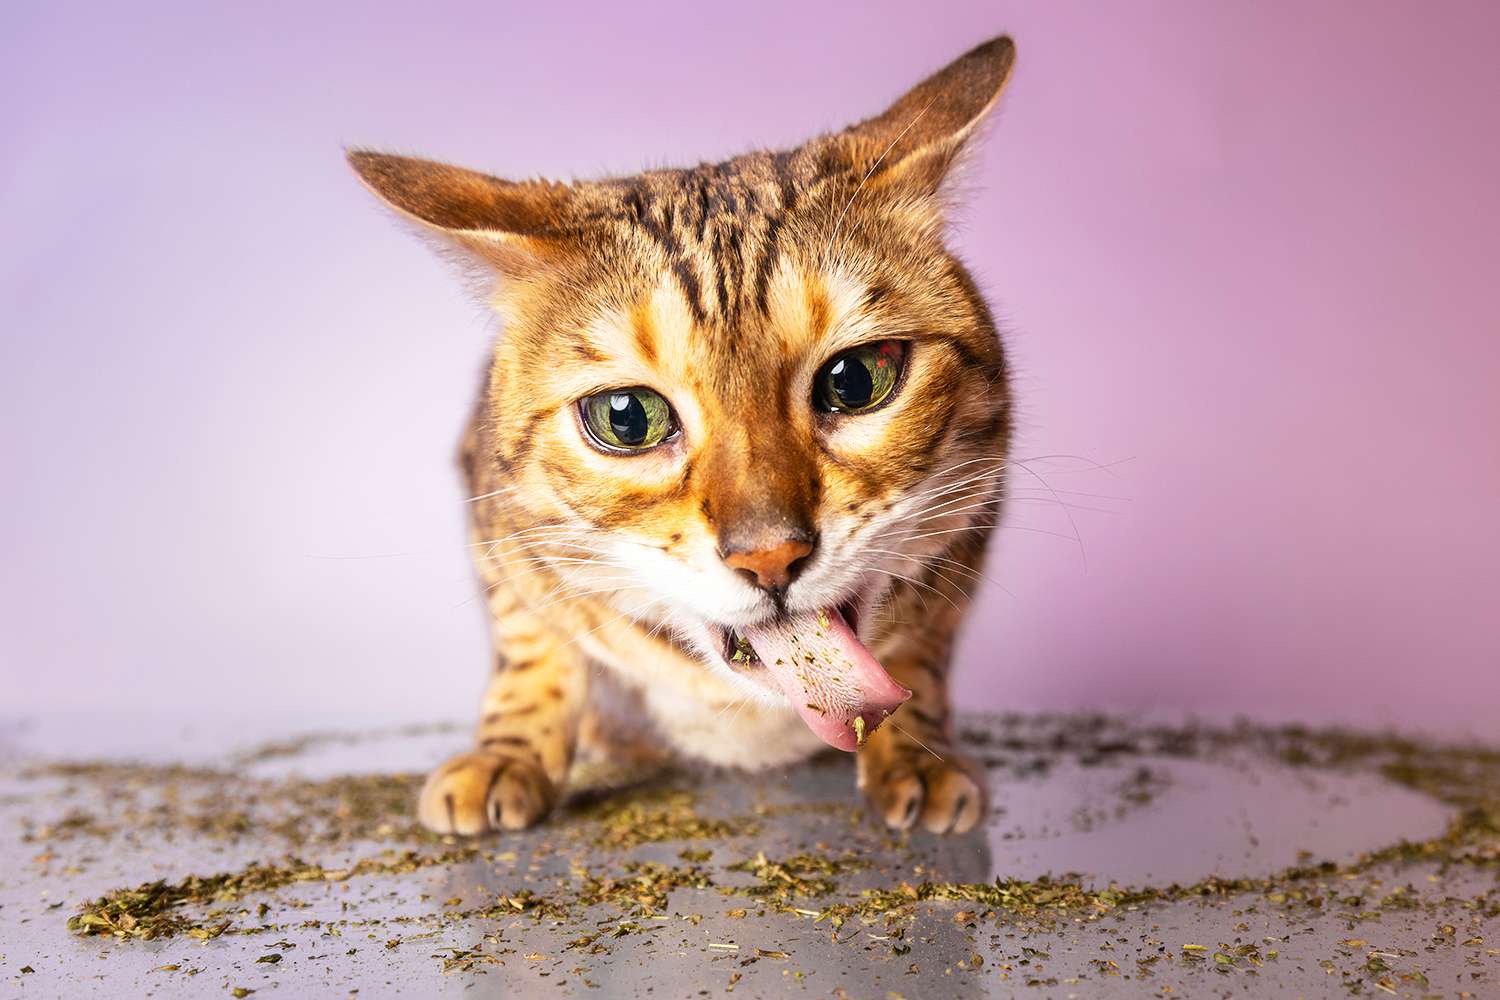 Unbelievable: Cats Smoking Catnip! Find Out How!